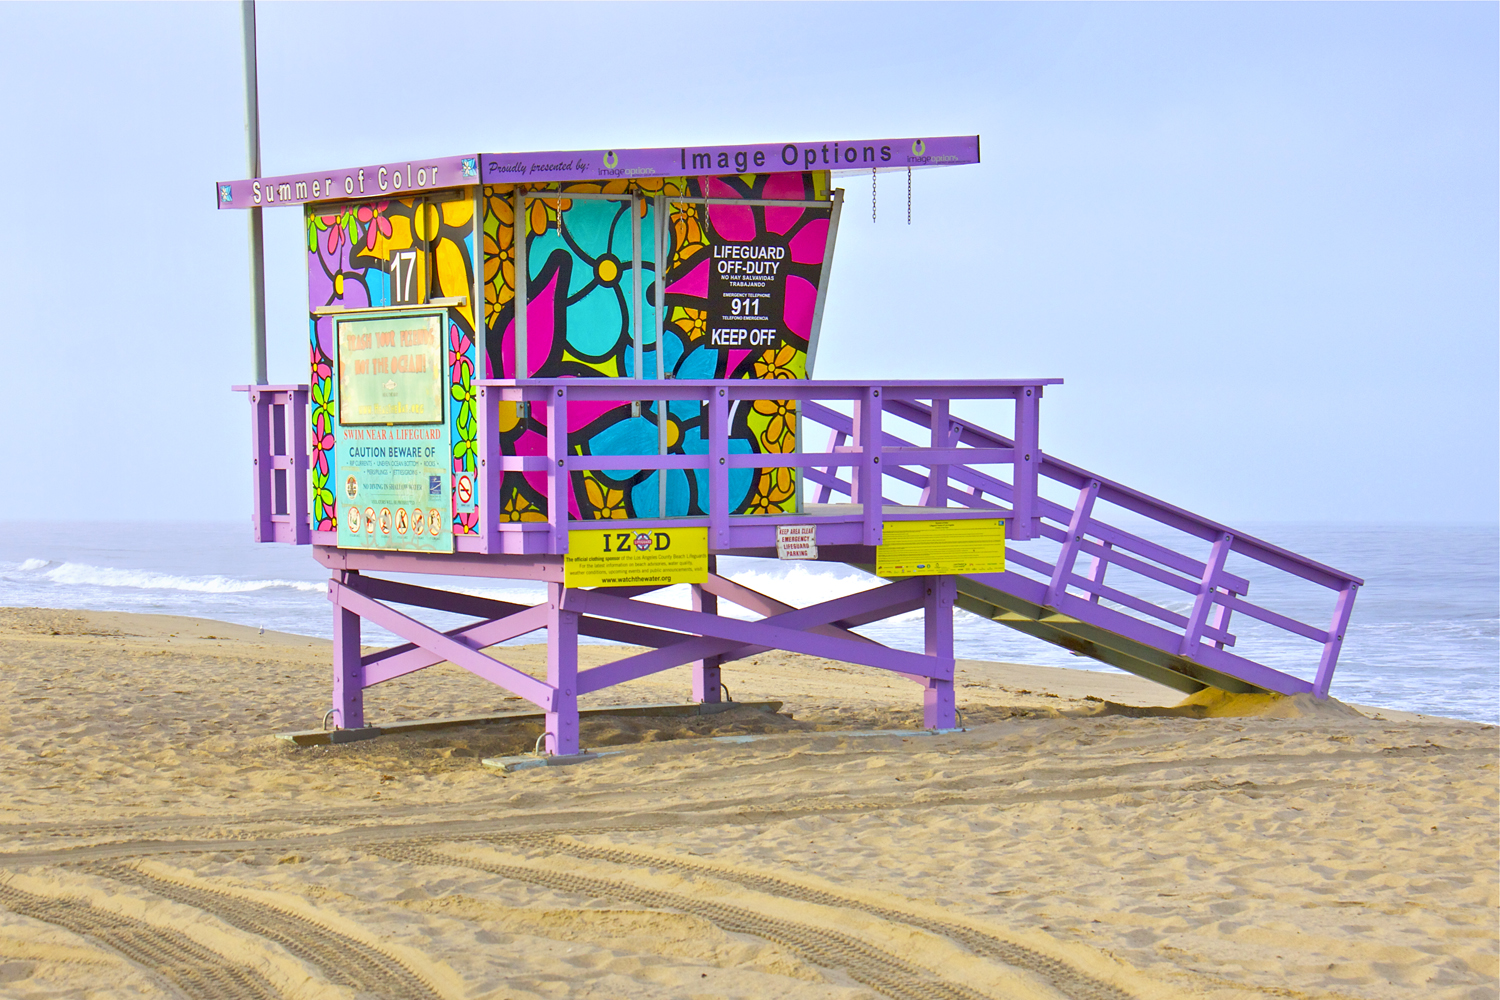 Portraits of Hope "Summer of Color" Lifeguard Tower, Los Angeles